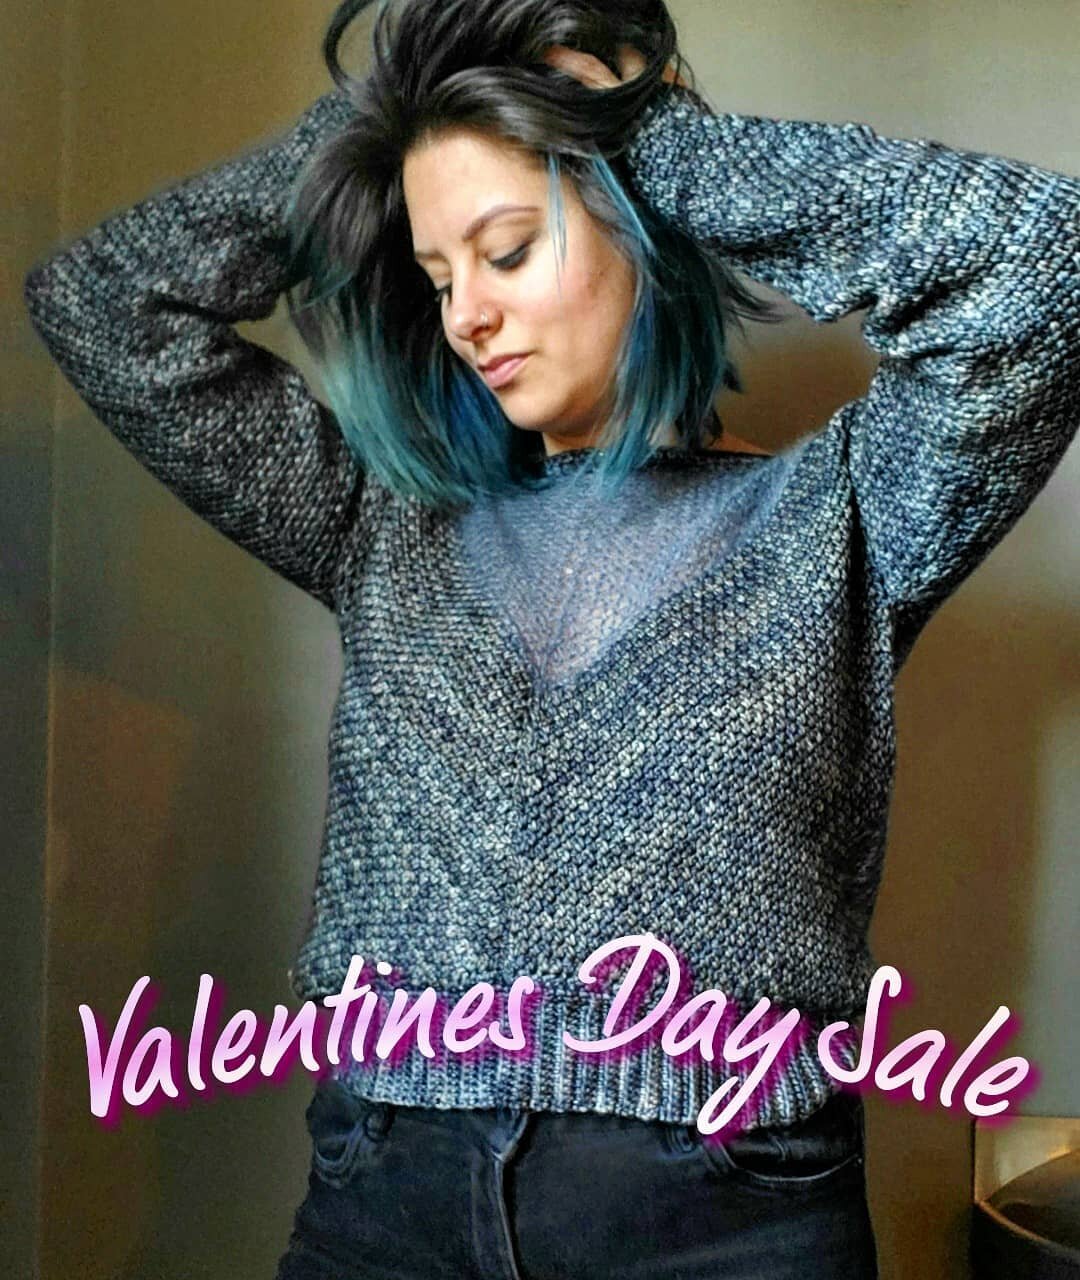 Show yourself or a that special someone some love! 💕💫

In both my Ravelry and my Etsy Shop I am hosting a sale. Buy 3 or more items and get 30% off your entire purchase!

Treat yourself or buy them for someone you love. 🔮🍄

No coupon code necessa